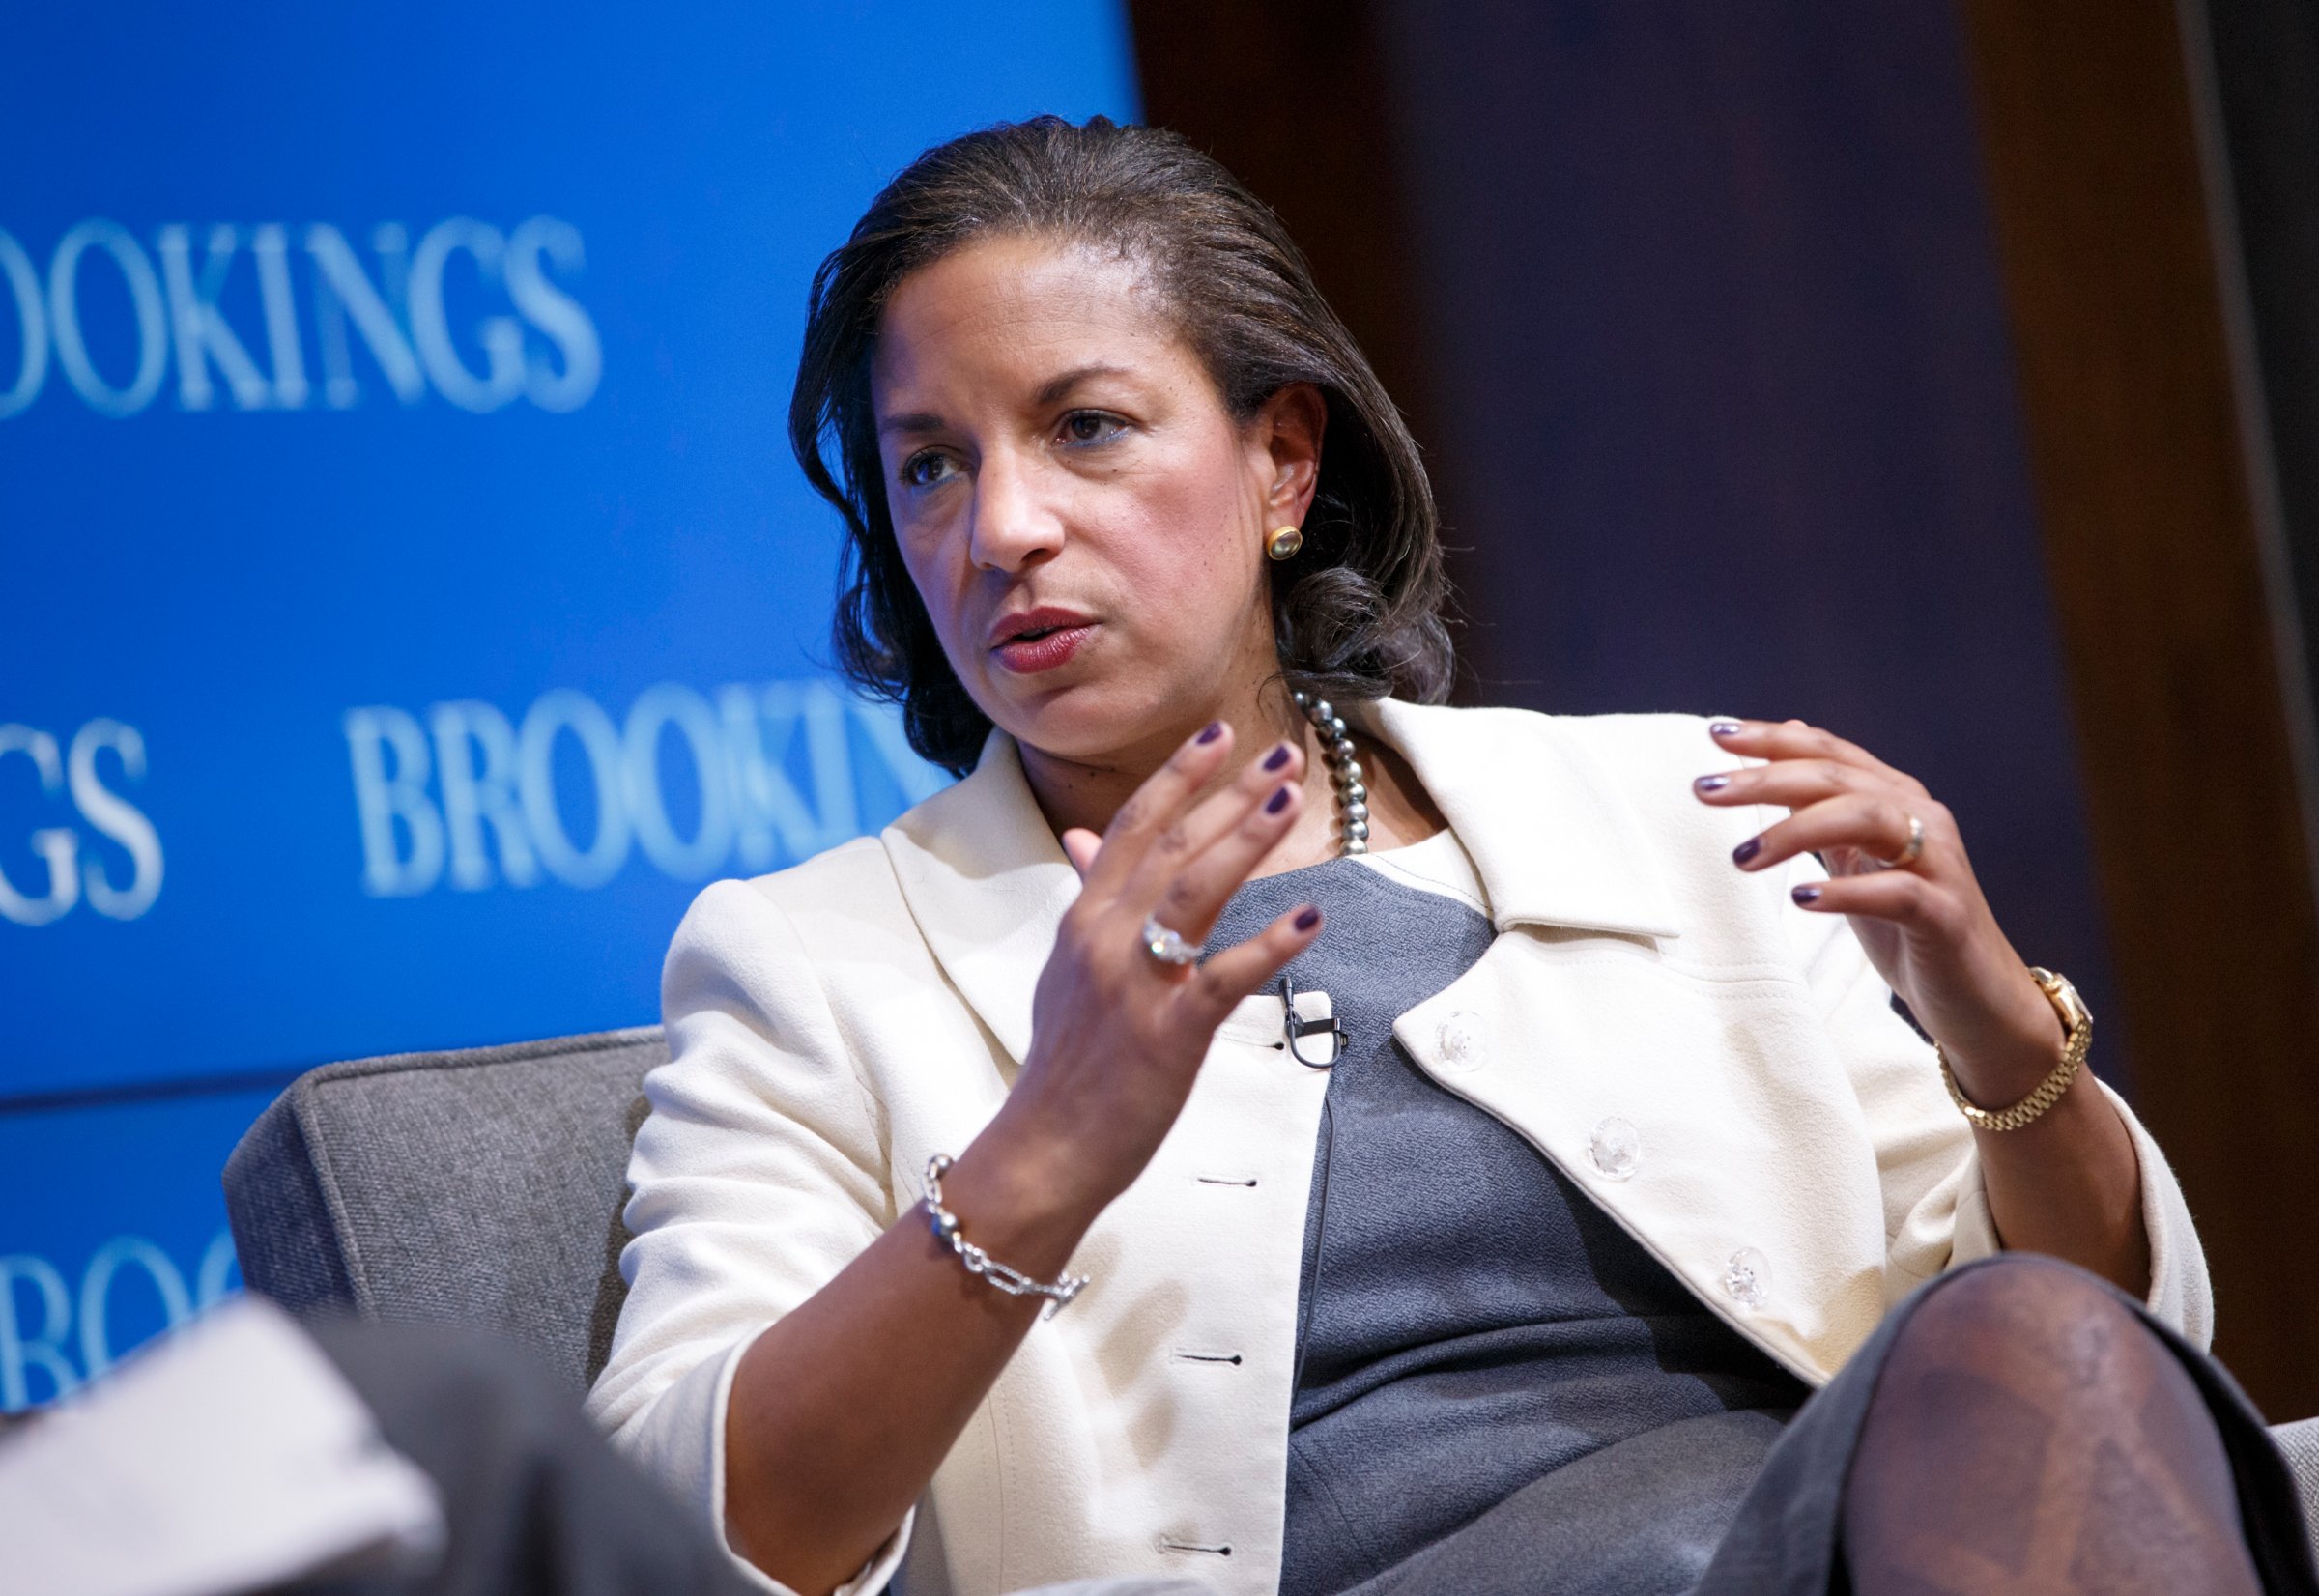 National Security Adviser Susan Rice speaks at the Brookings Institution to outline President Barack Obama's foreign policy priorities on Feb. 6, 2015, in Washington.